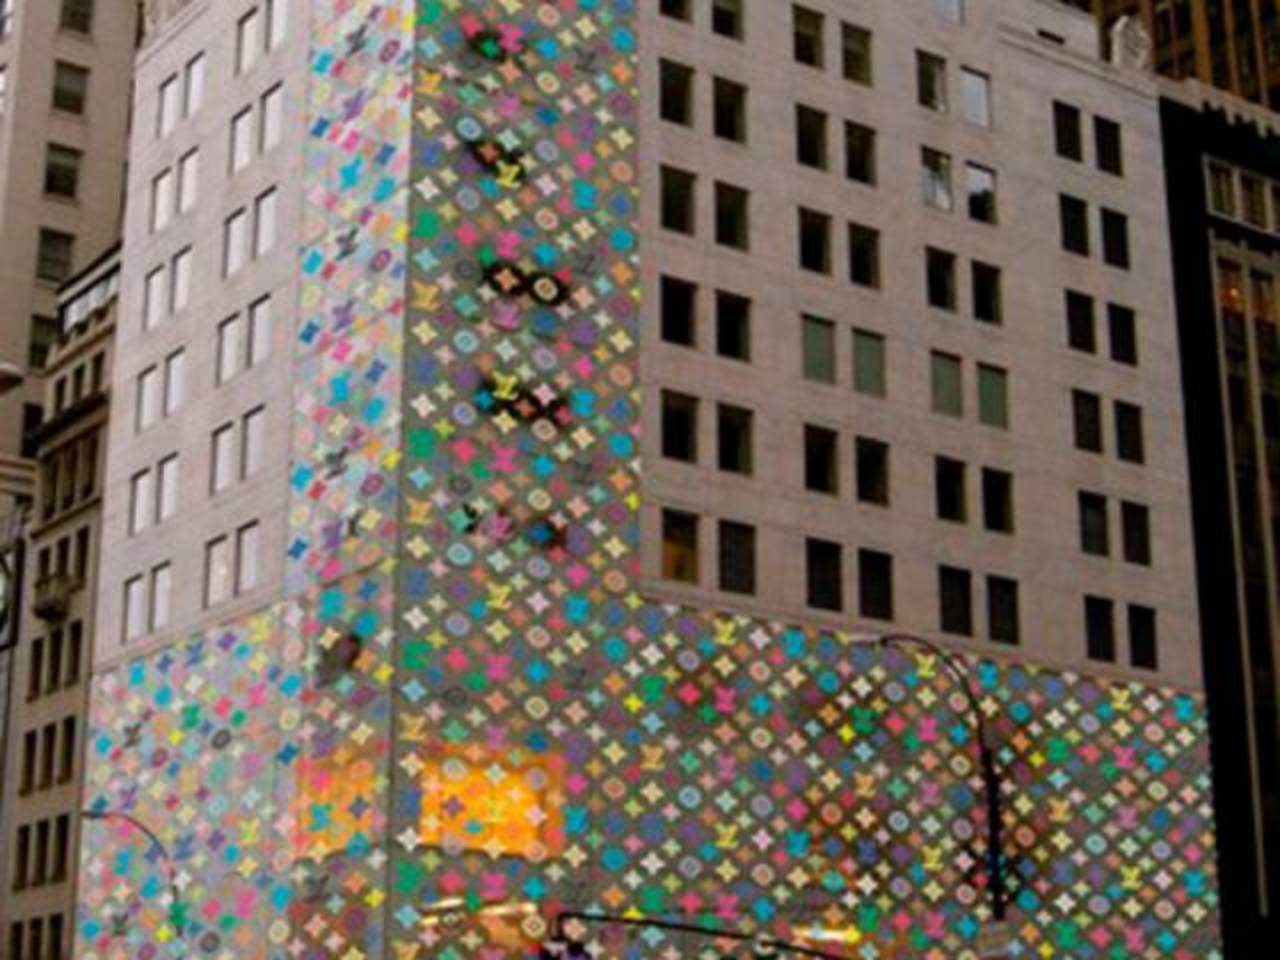 The Louis Vuitton flagship store on Fifth Avenue in New York is